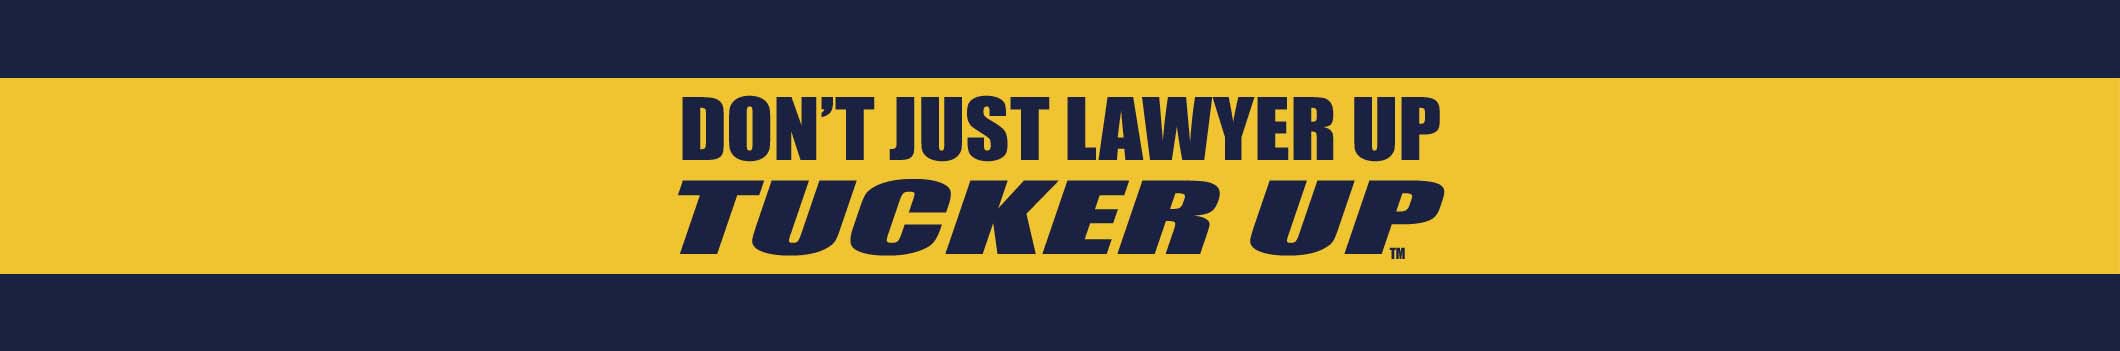 Don't Just Lawyer Up Tucker Up